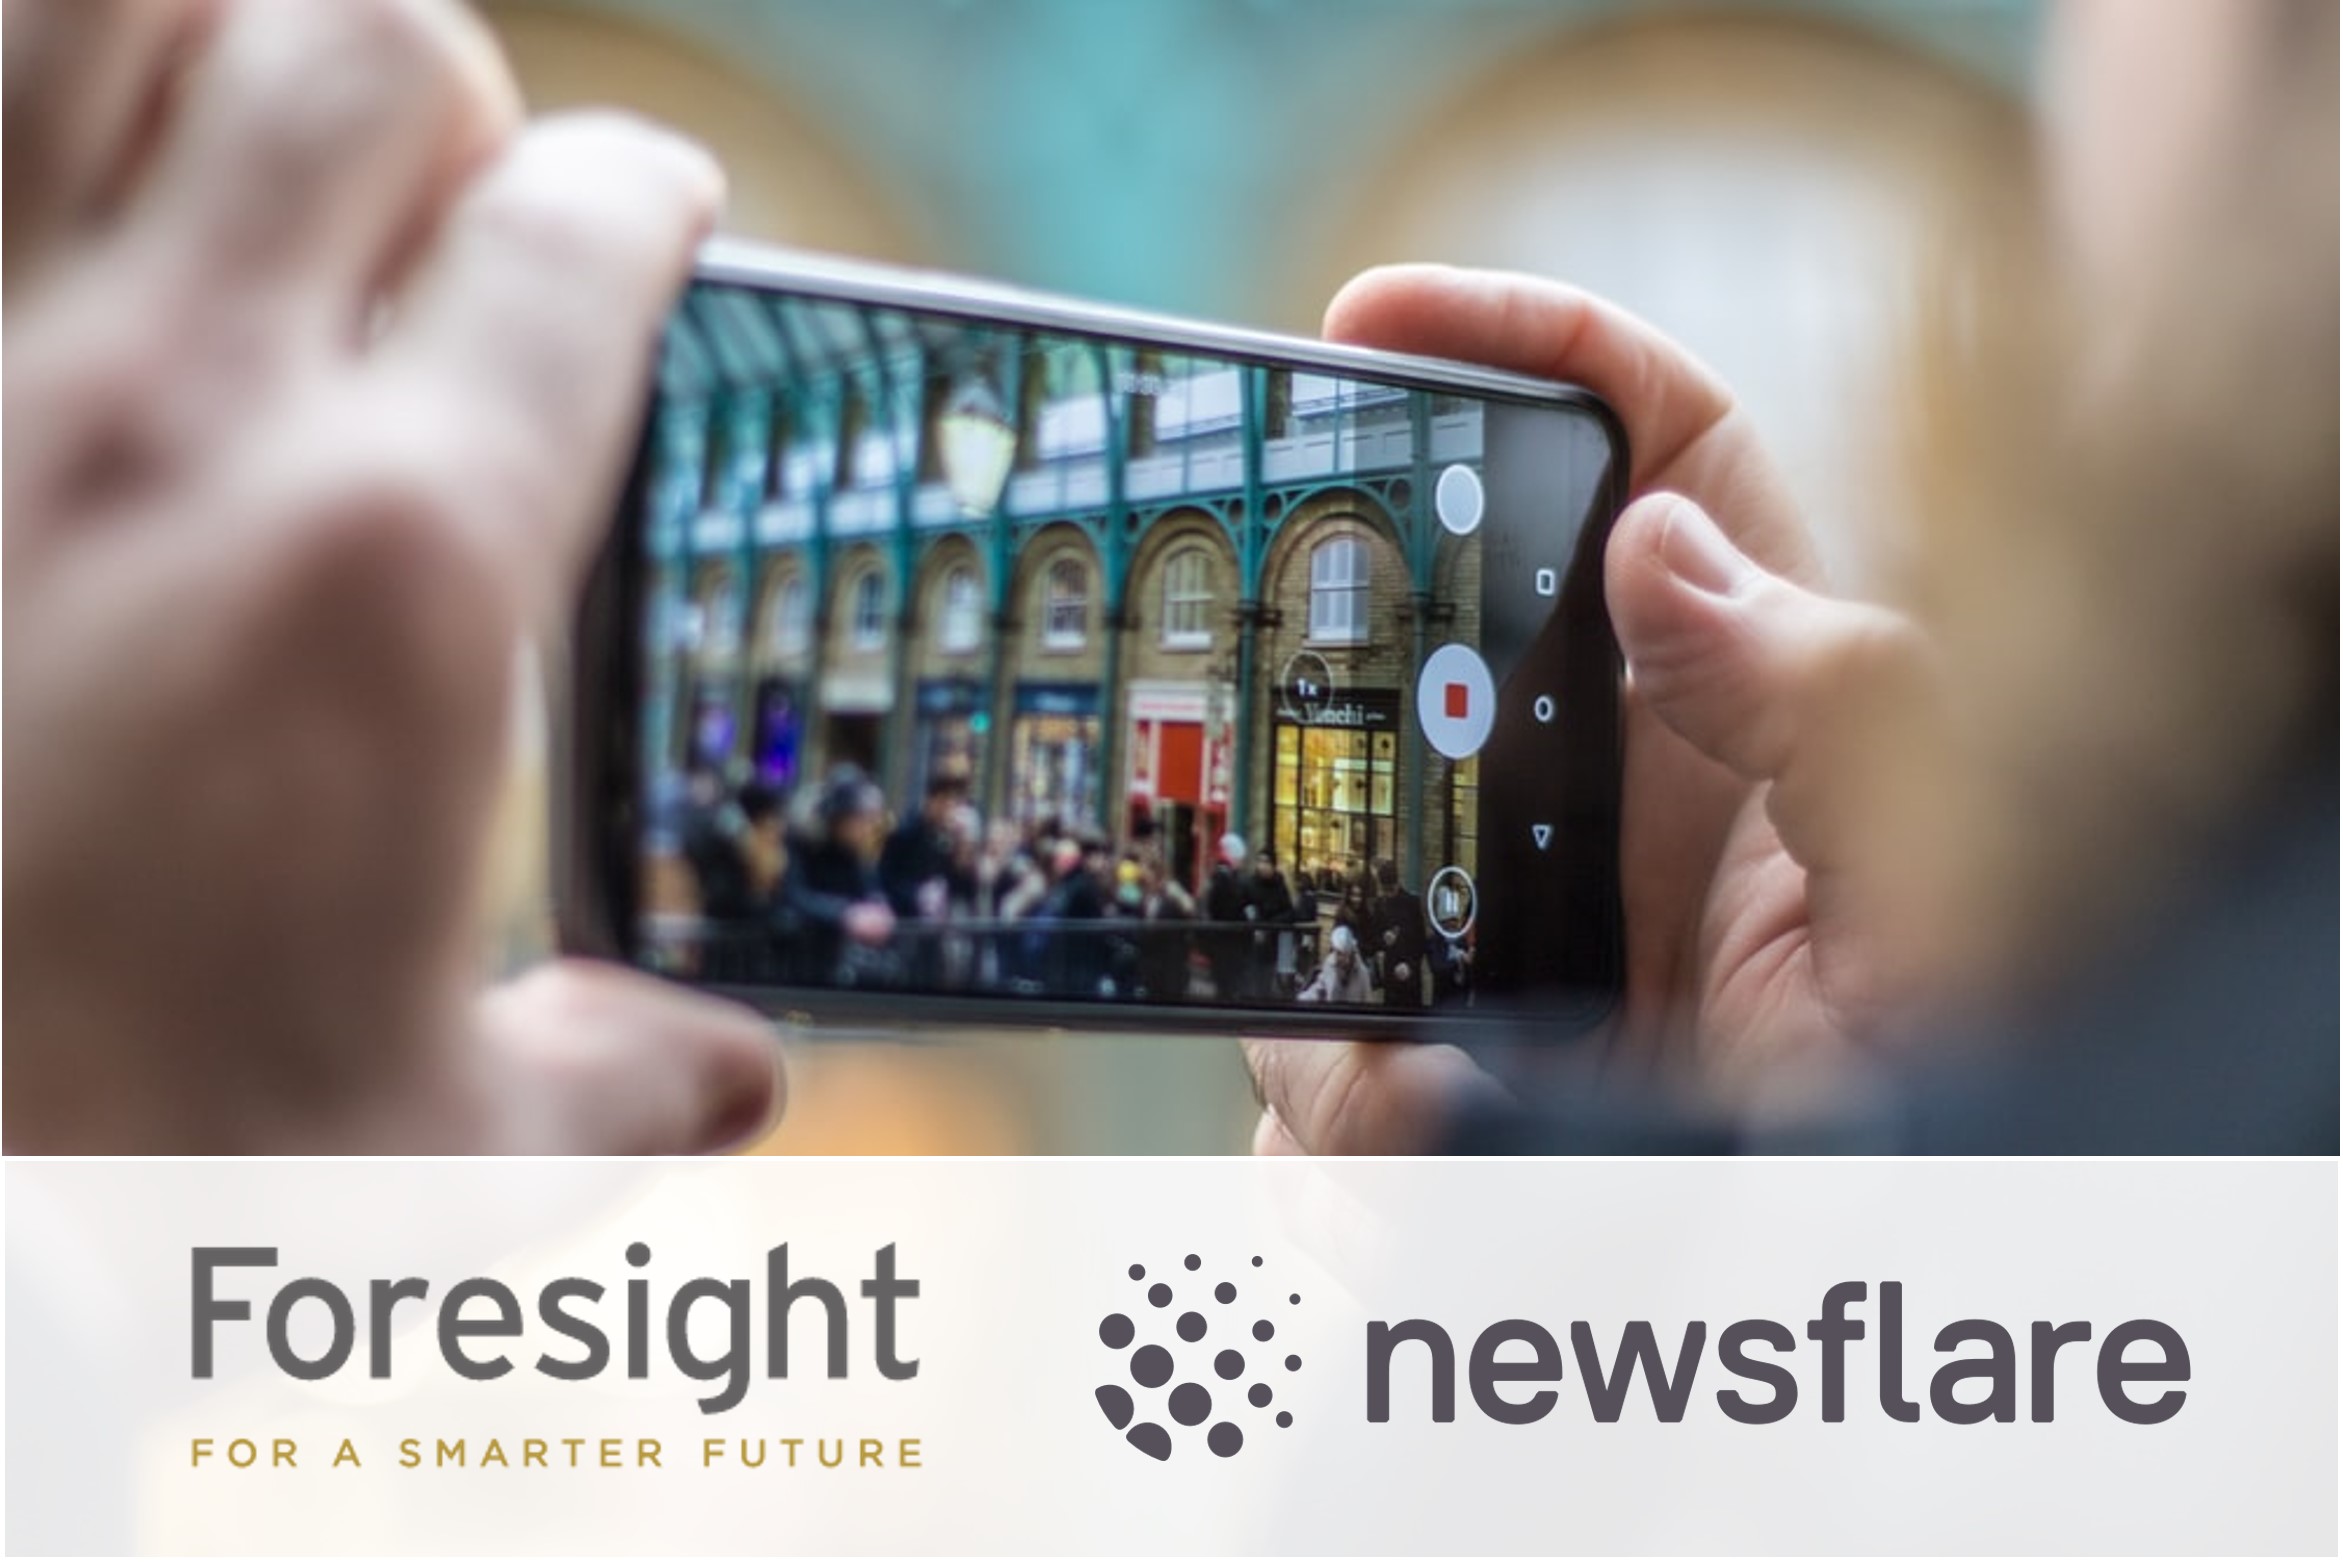 Luminii provides CDD support to Foresight on their investment in Newsflare